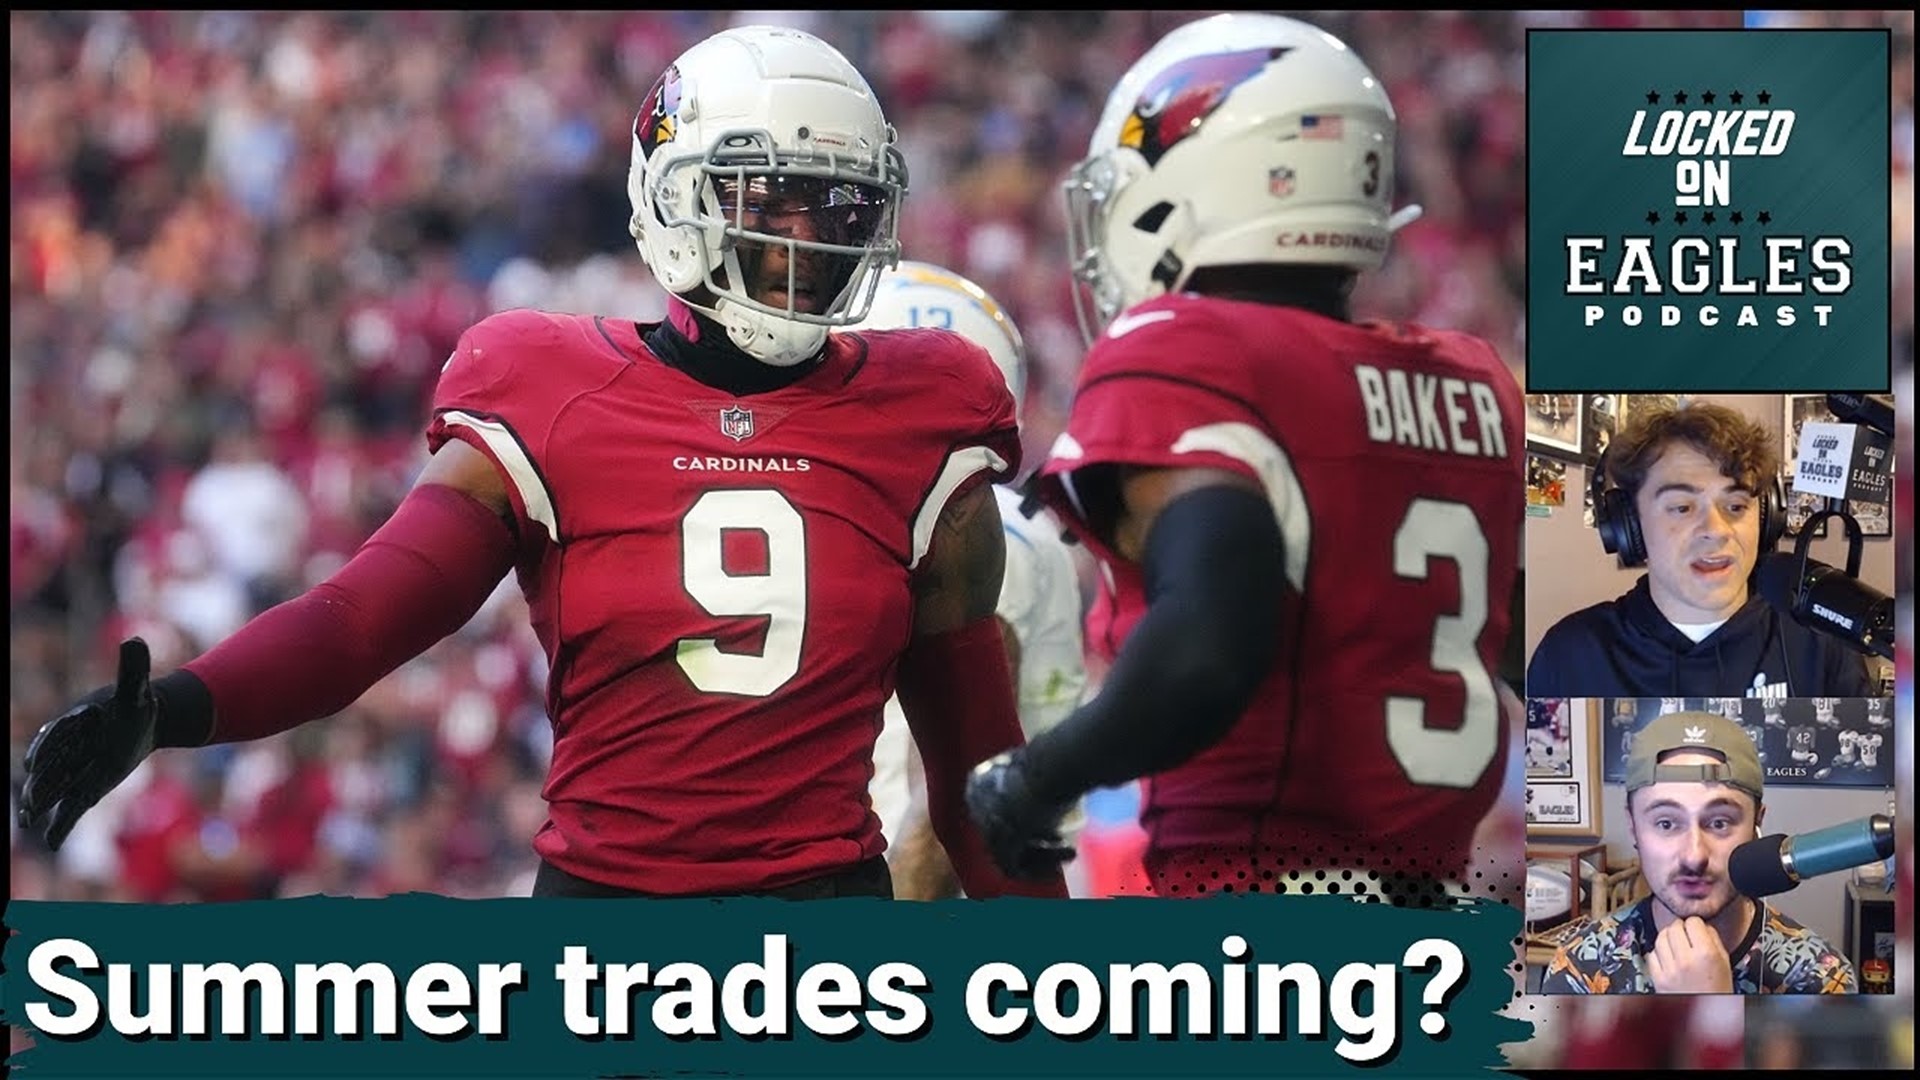 The Philadelphia Eagles have a knack for making trades after the NFL Draft. Could they target the Arizona Cardinals as a team to make a deal with?